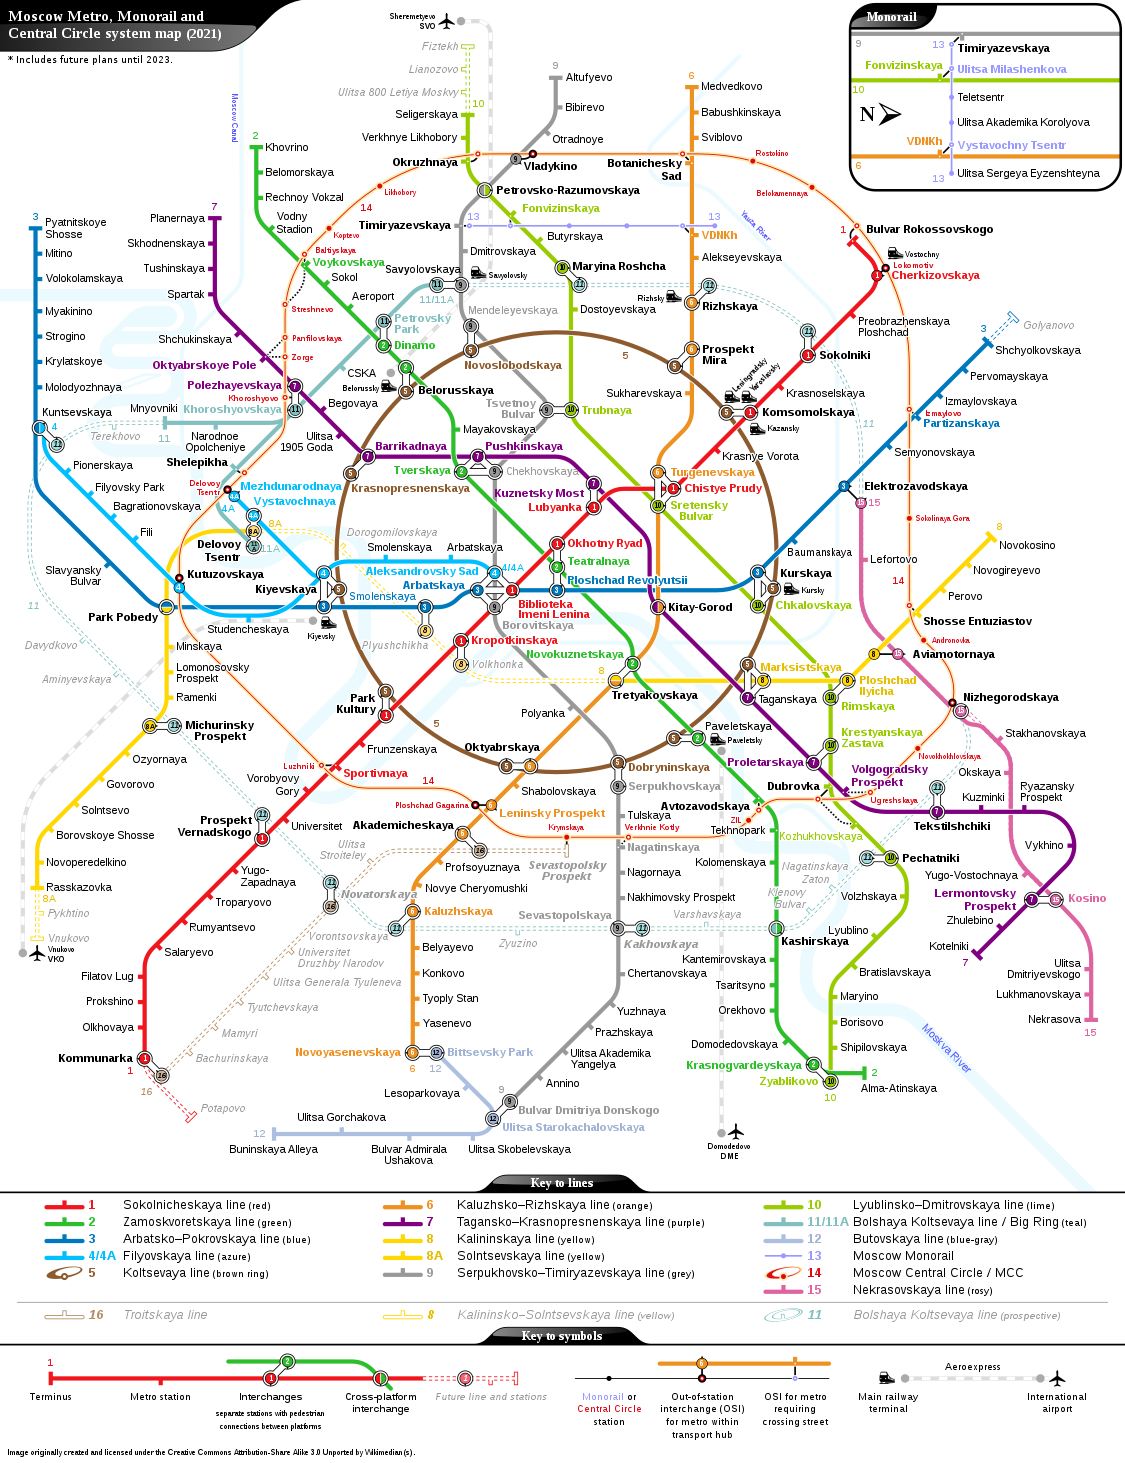 1125px-Moscow_metro_ring_railway_map_en_sb_future.svg.png